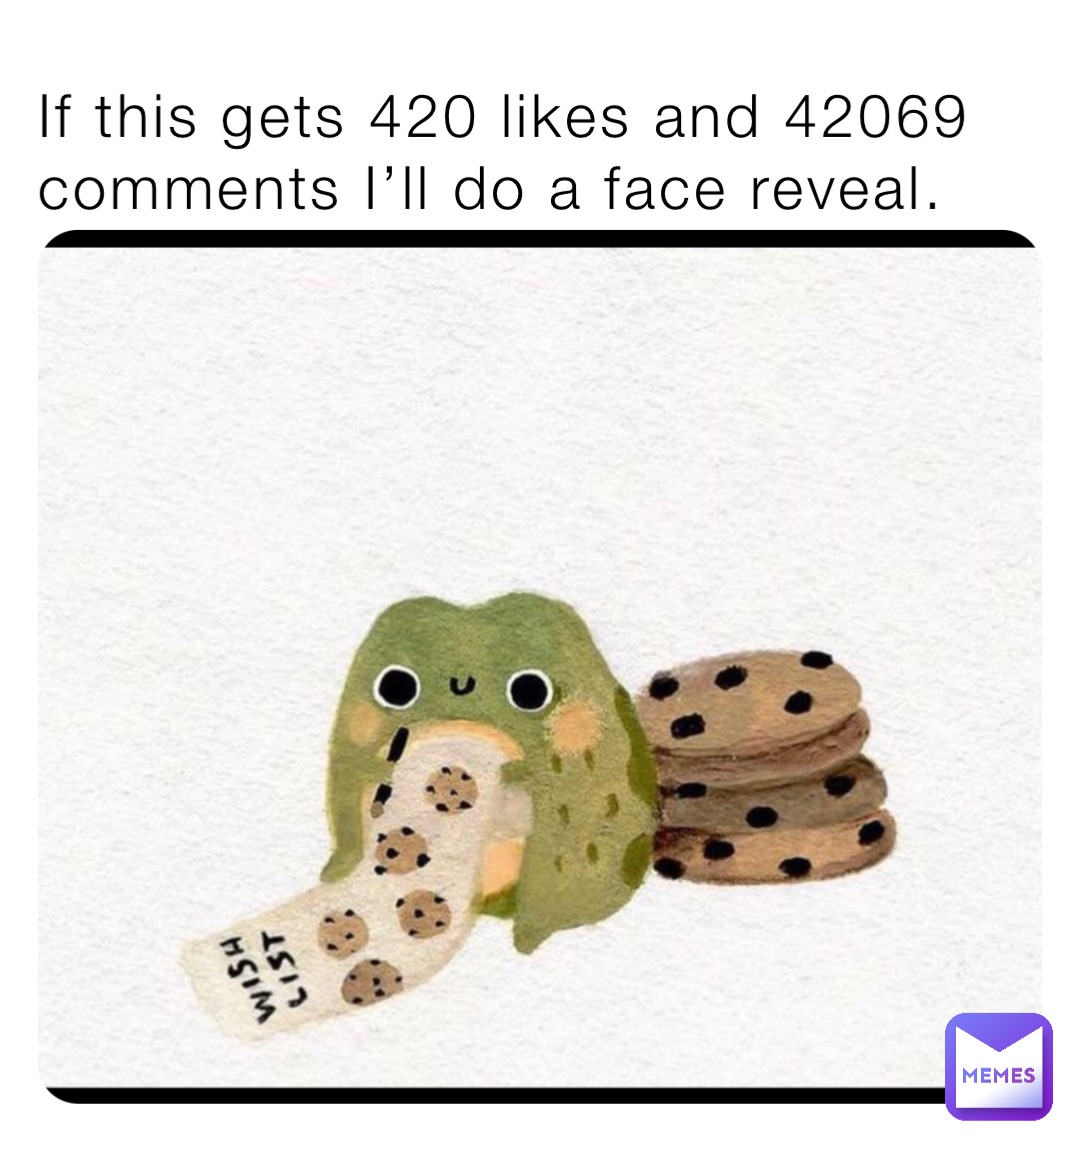 If this gets 420 likes and 42069 comments I’ll do a face reveal.